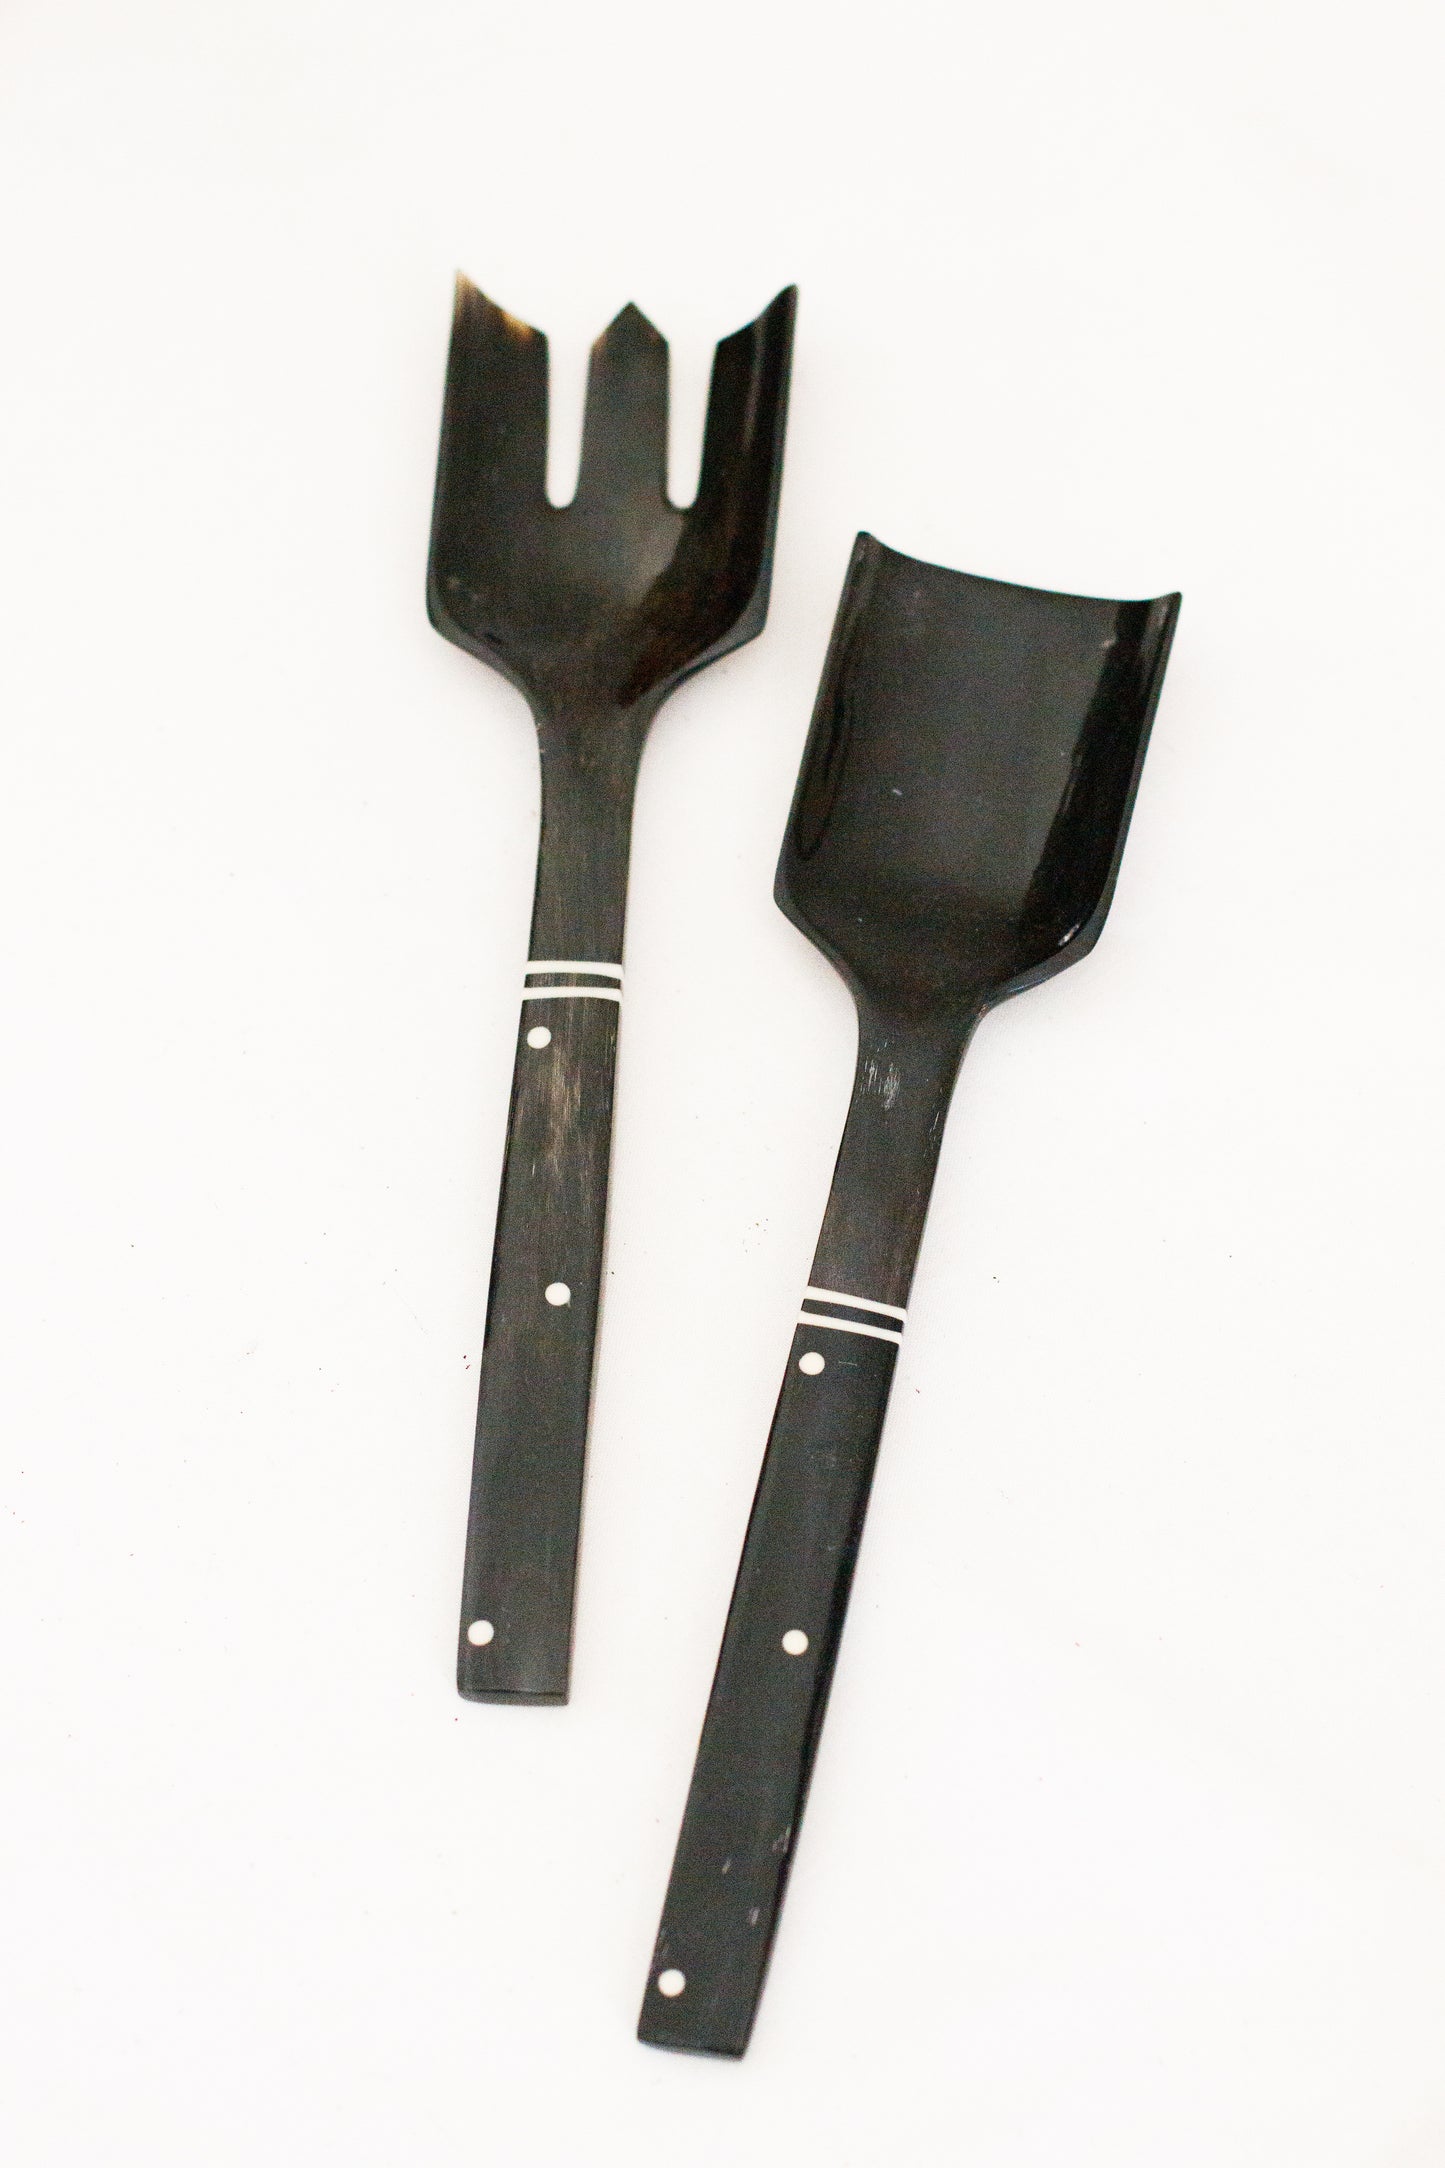 Slender Cow Horn Salad Servers with Bone Inlay